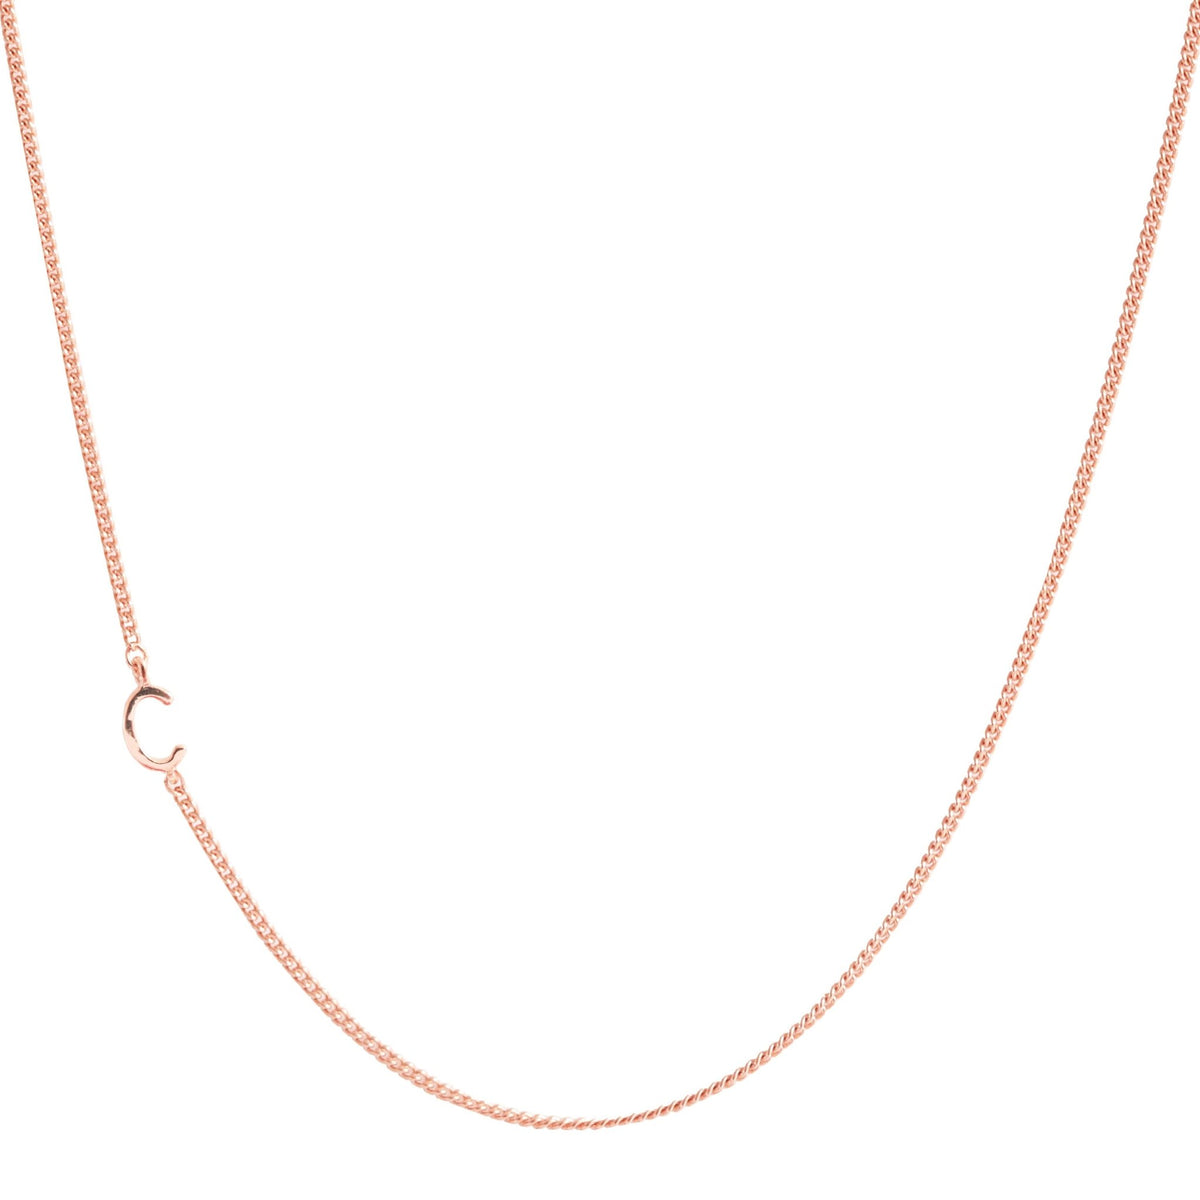 NOTABLE OFFSET INITIAL NECKLACE - C - GOLD, ROSE GOLD, SILVER - SO PRETTY CARA COTTER